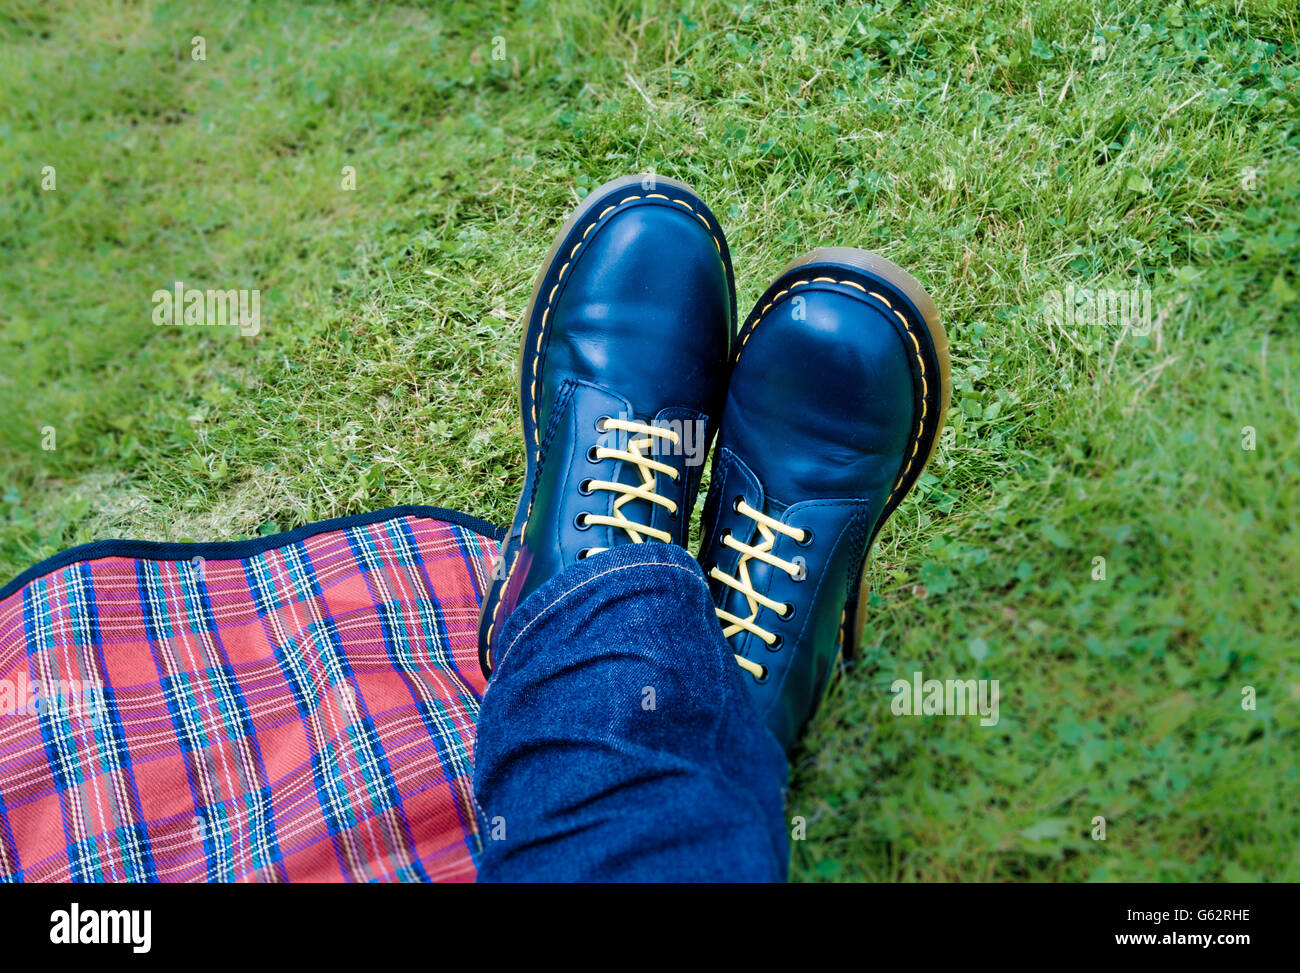 Feet with blue Dr Marten's Boots and red plaid picnic blanket on grass Stock Photo